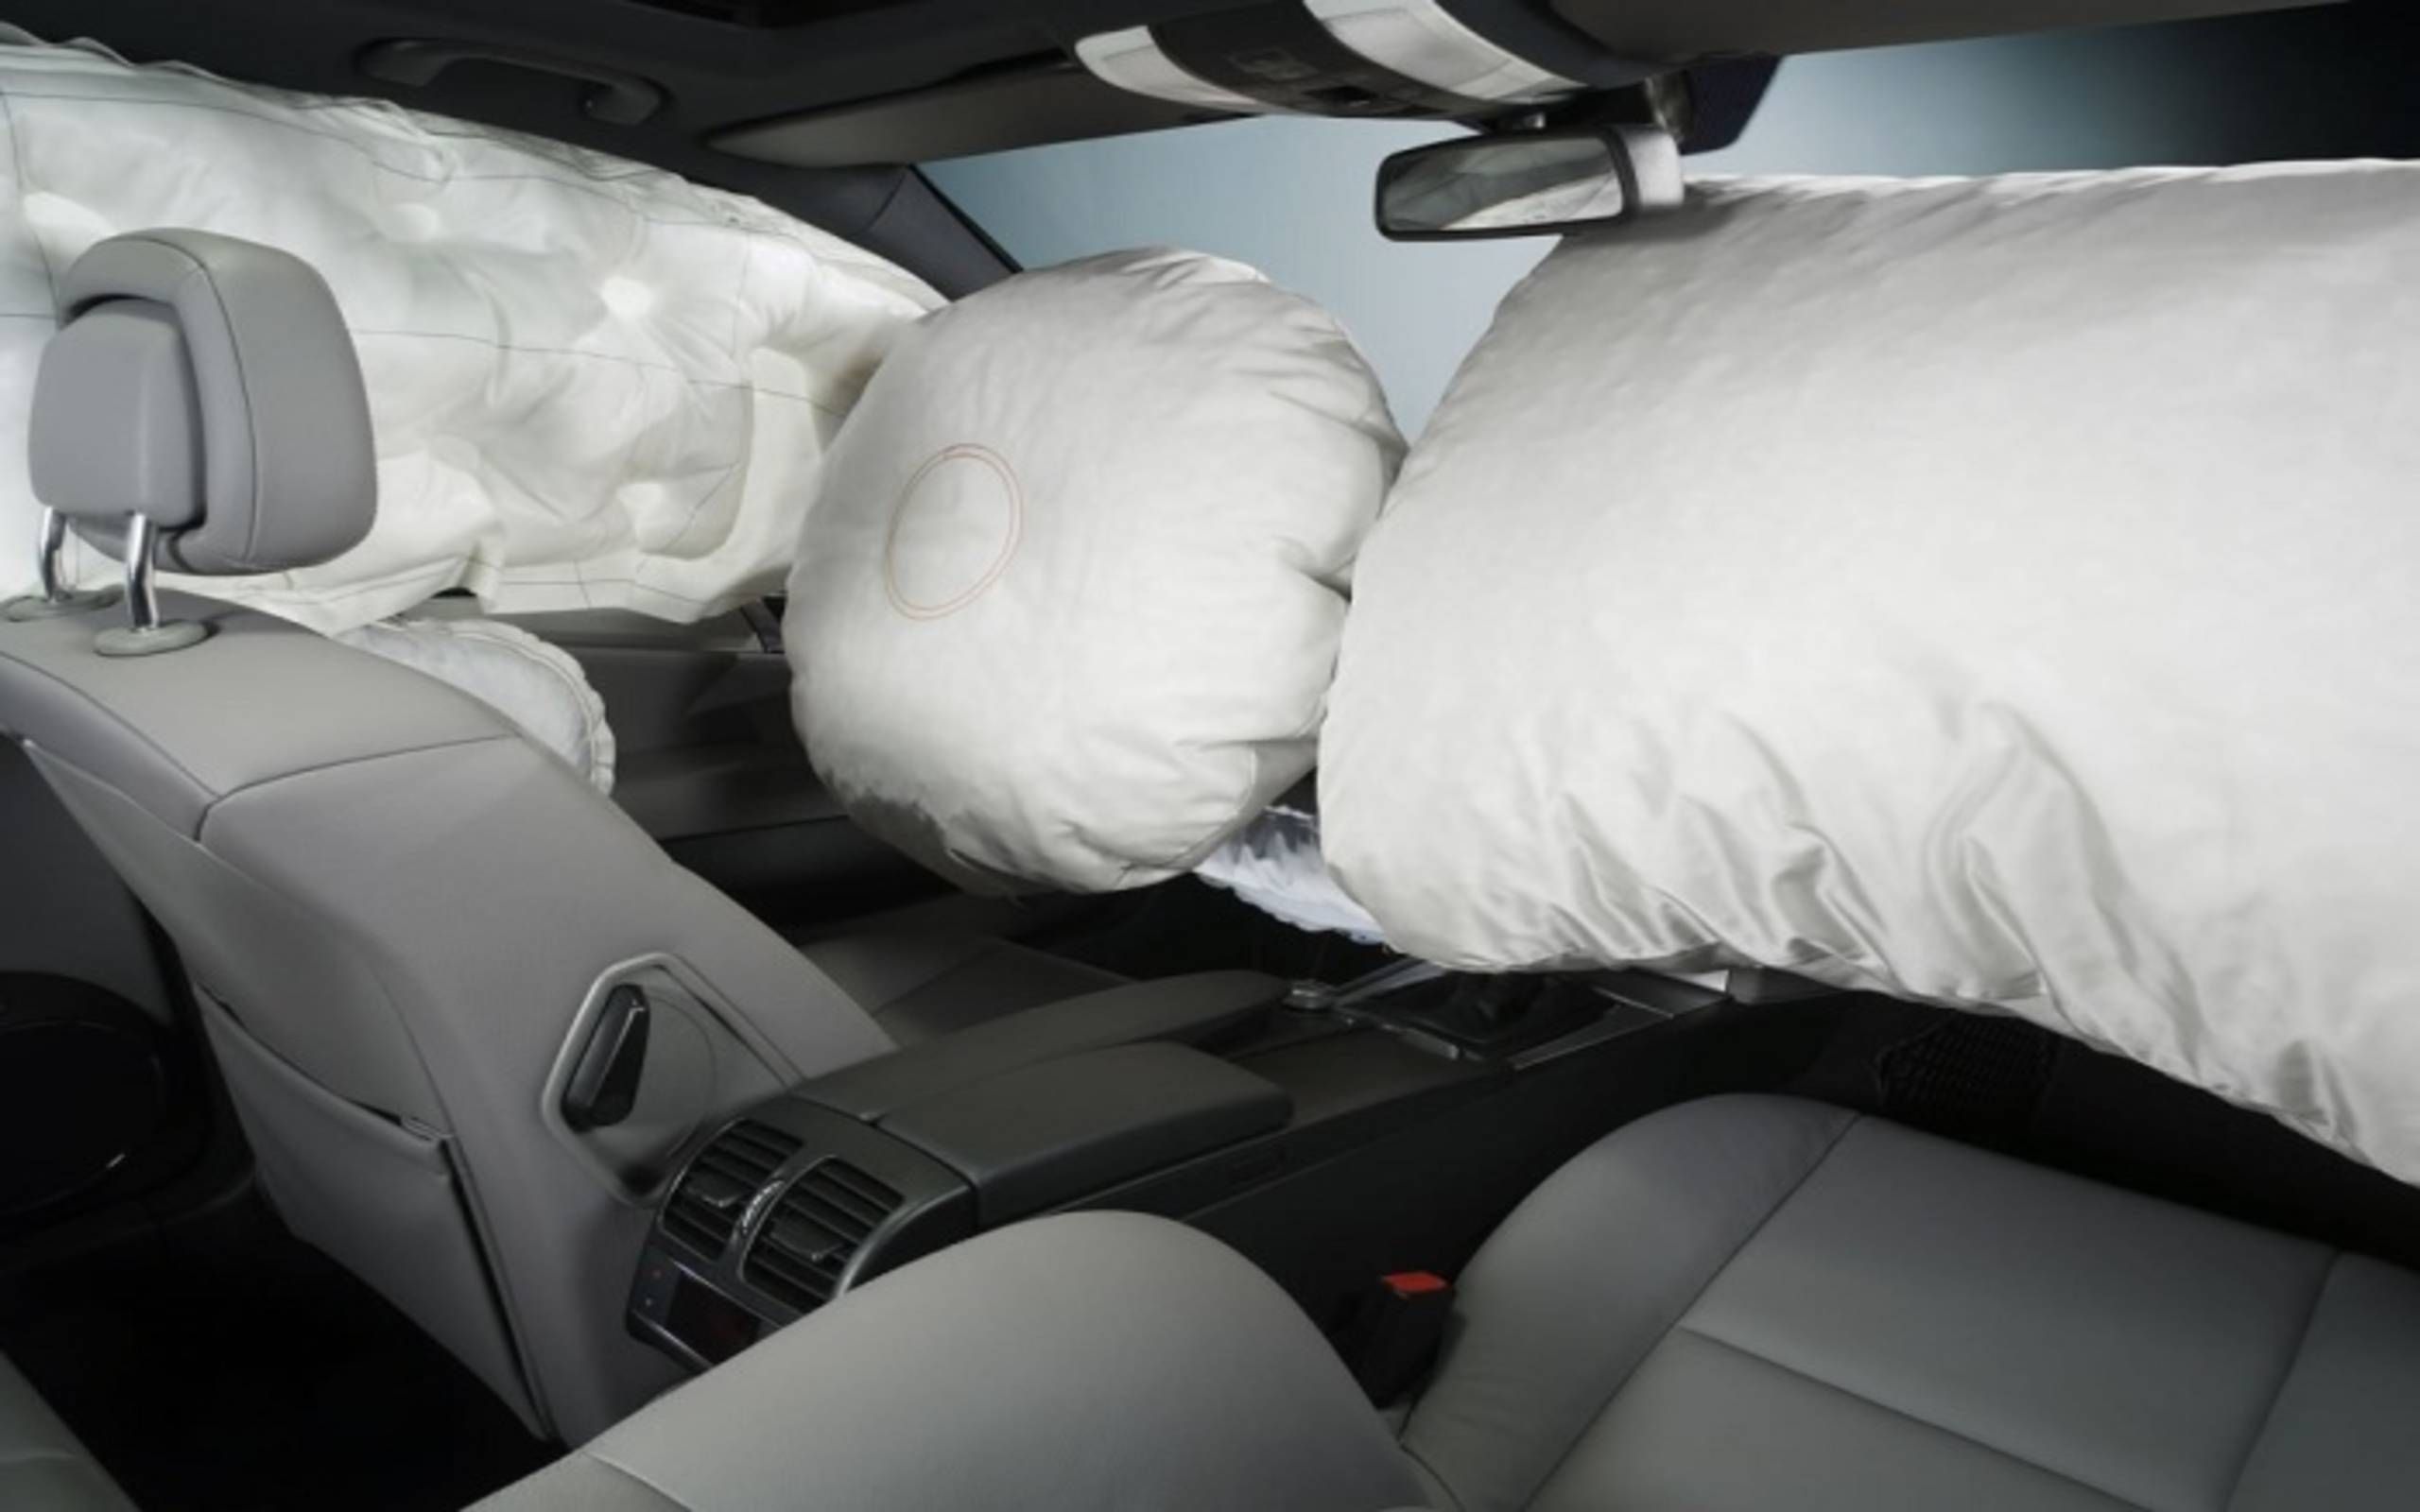 Stay Up-To-Date on Airbag Recalls for Your Vehicle